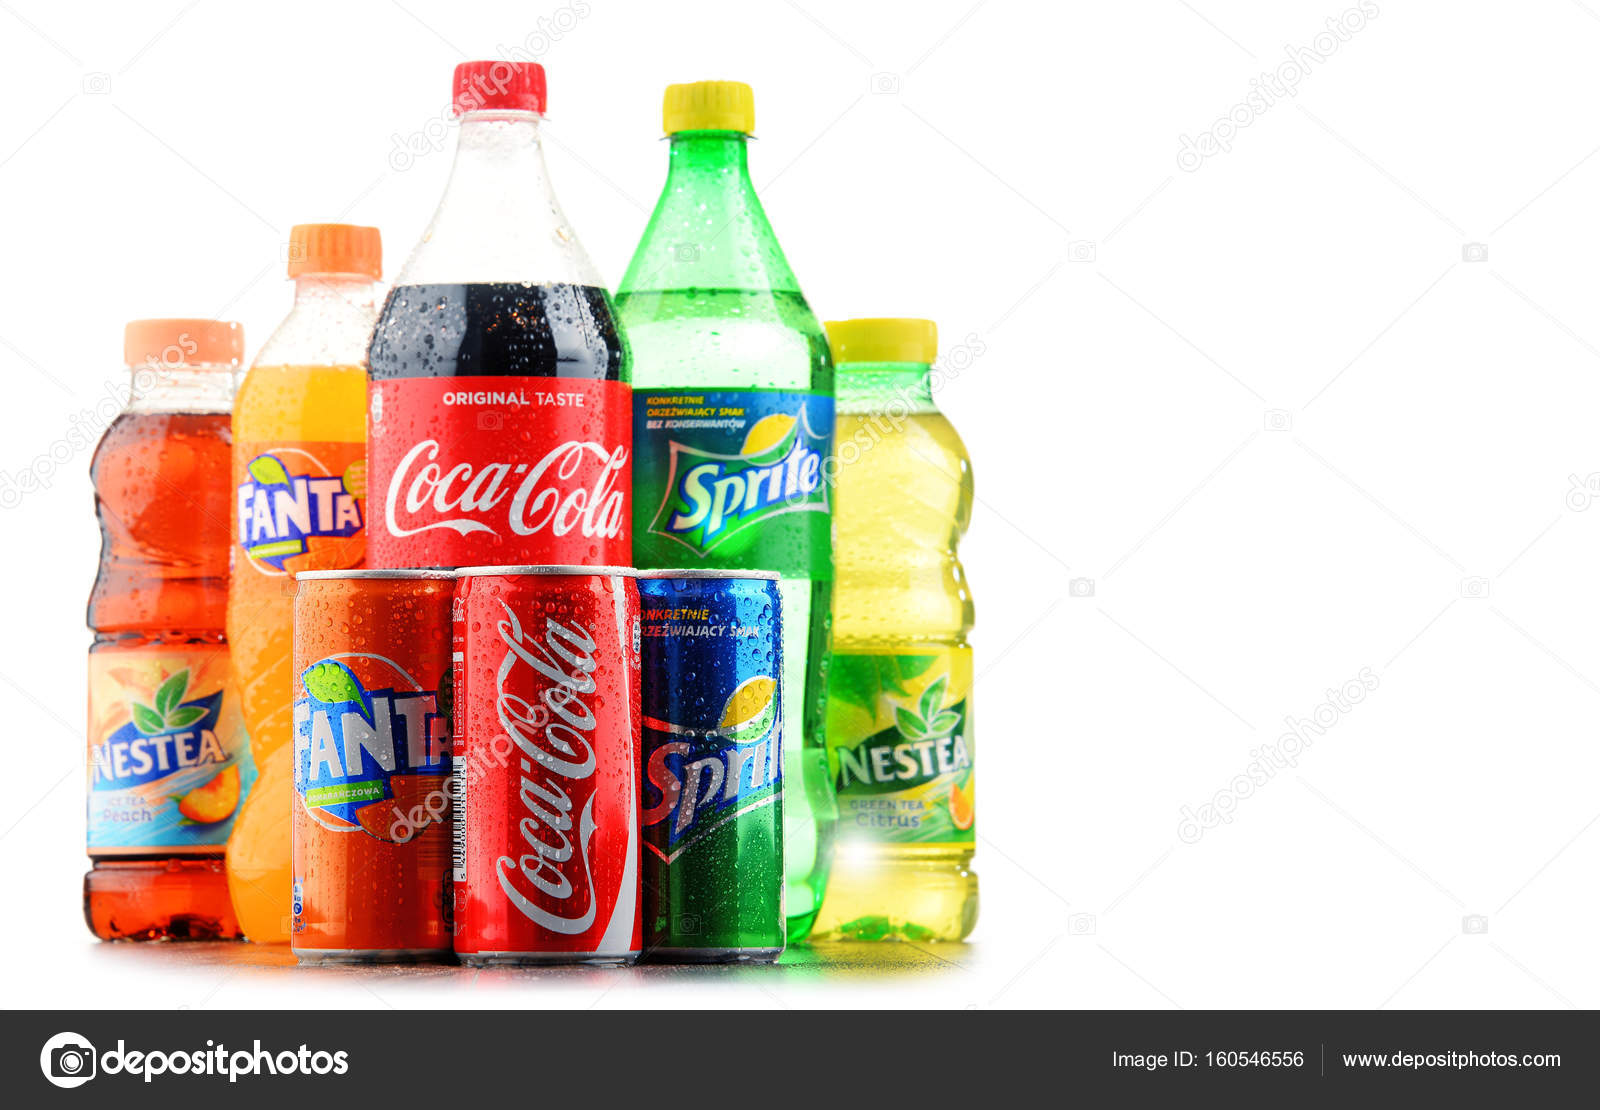 Bottles of global soft drink brands including products of Coca